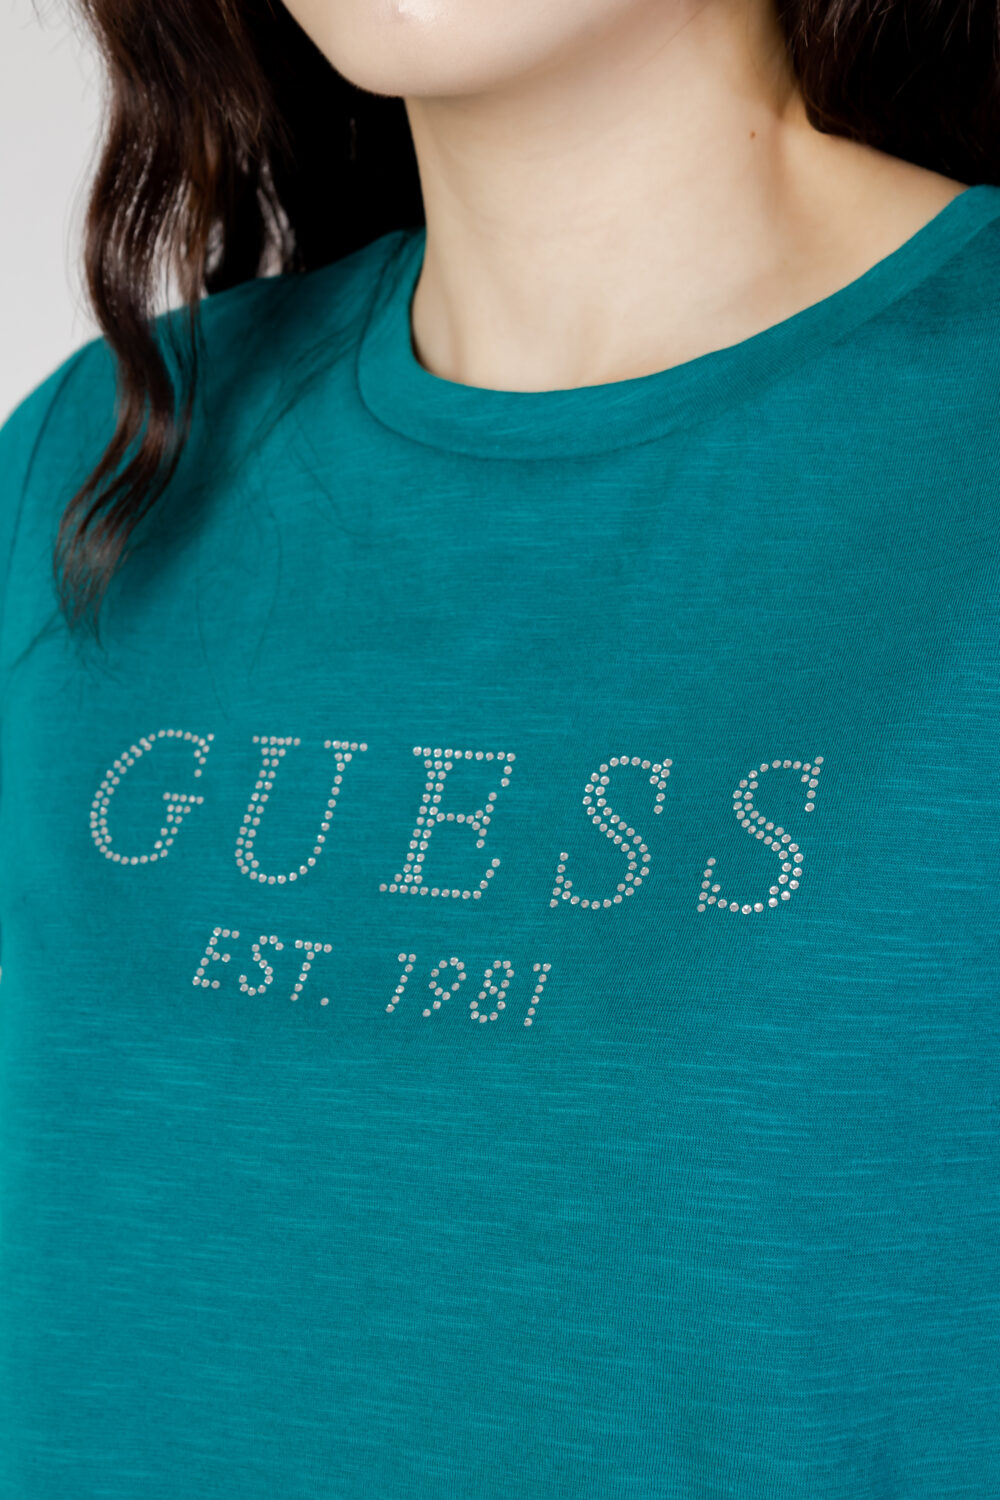 T-shirt Guess SS 1981 CRYSTAL EASY Verde - Foto 2